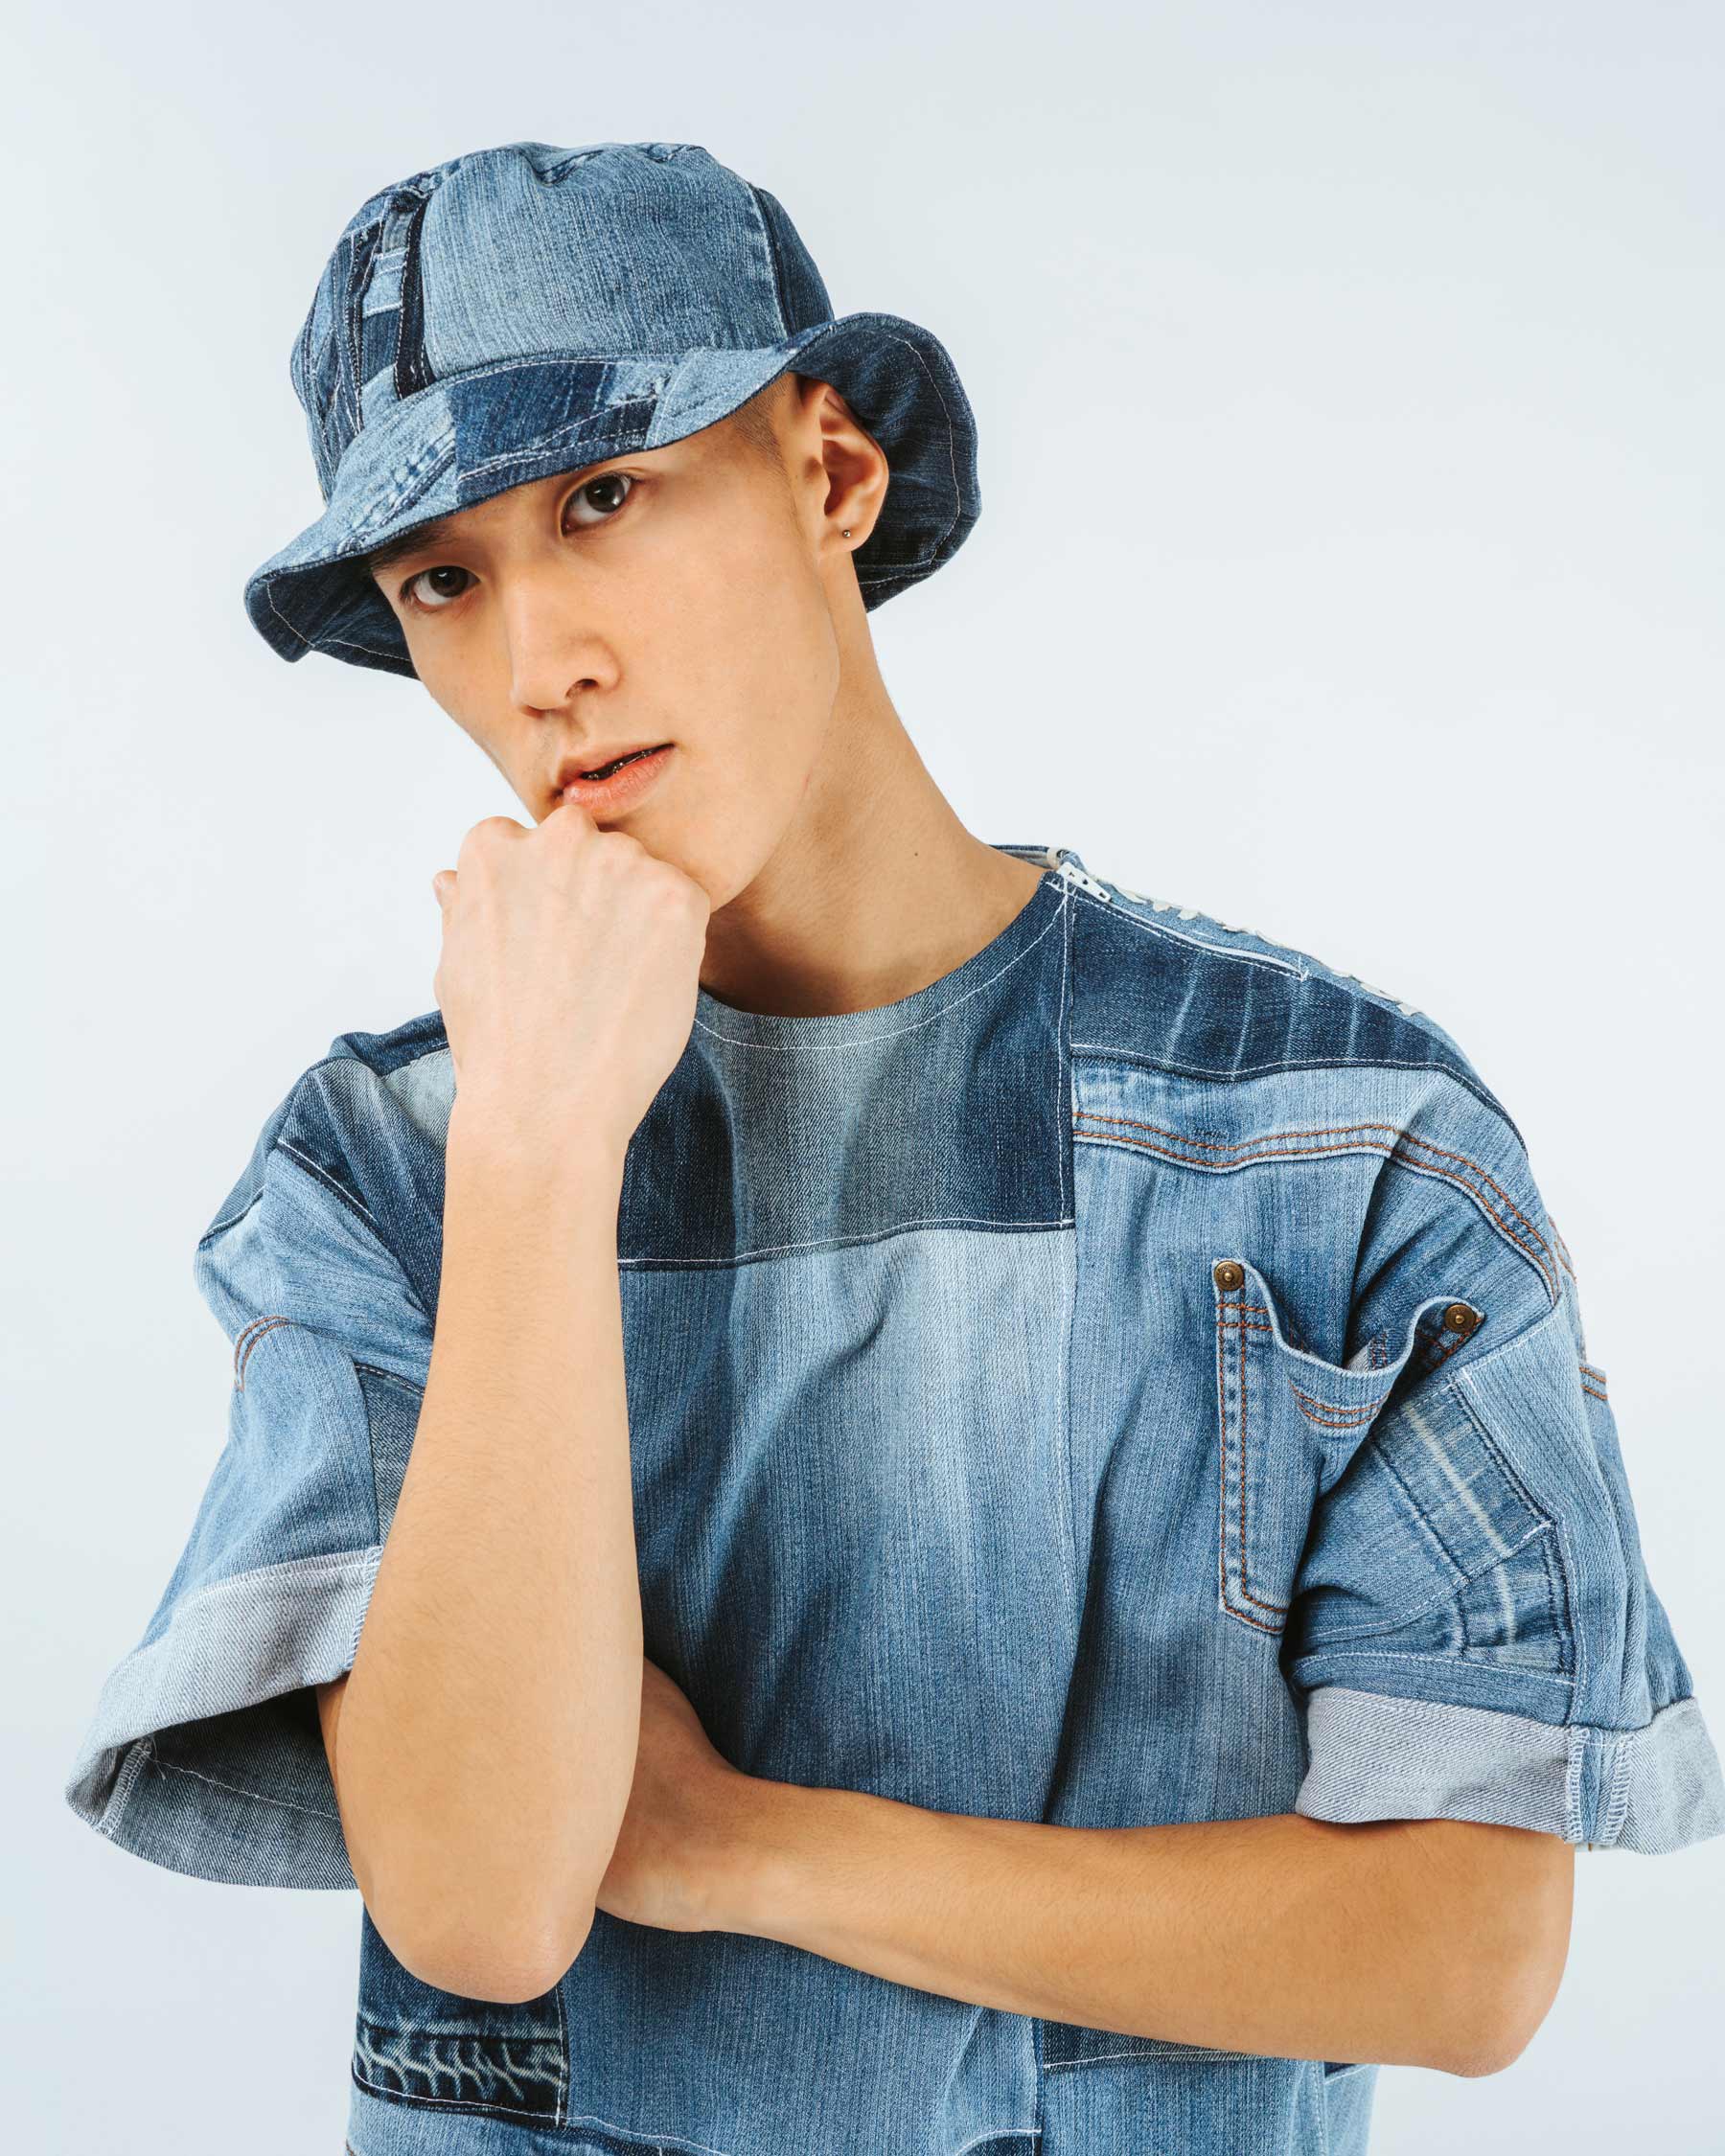 Patchwork Denim Bucket Hat Recycled Jeans Upcycled 